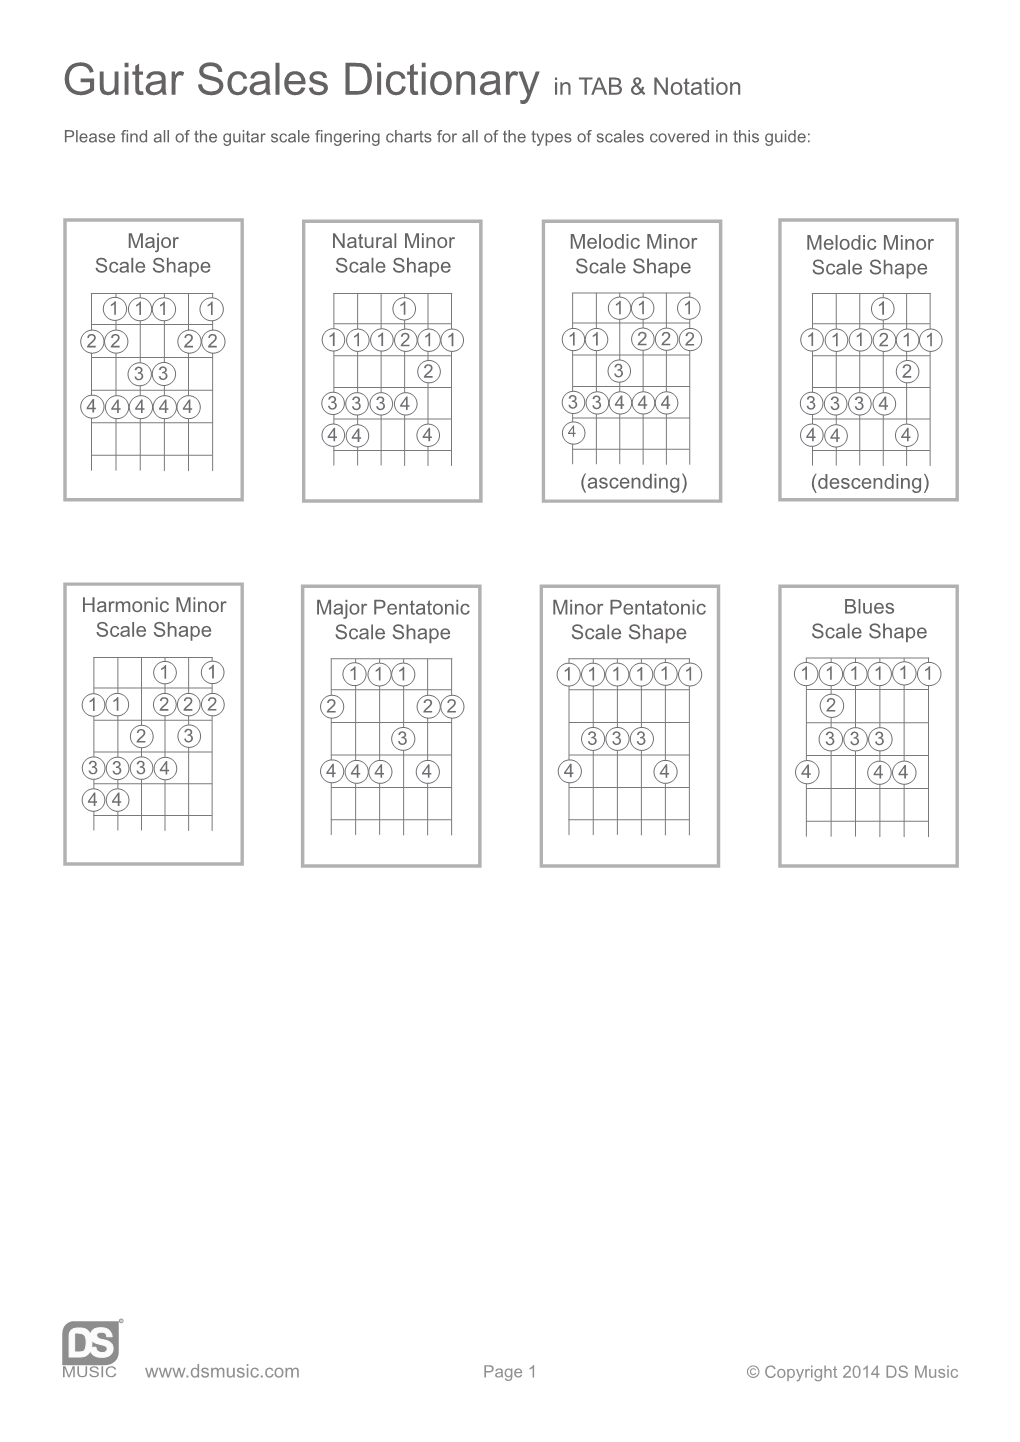 Guitar Scales Dictionary in TAB & Notation | DS Music